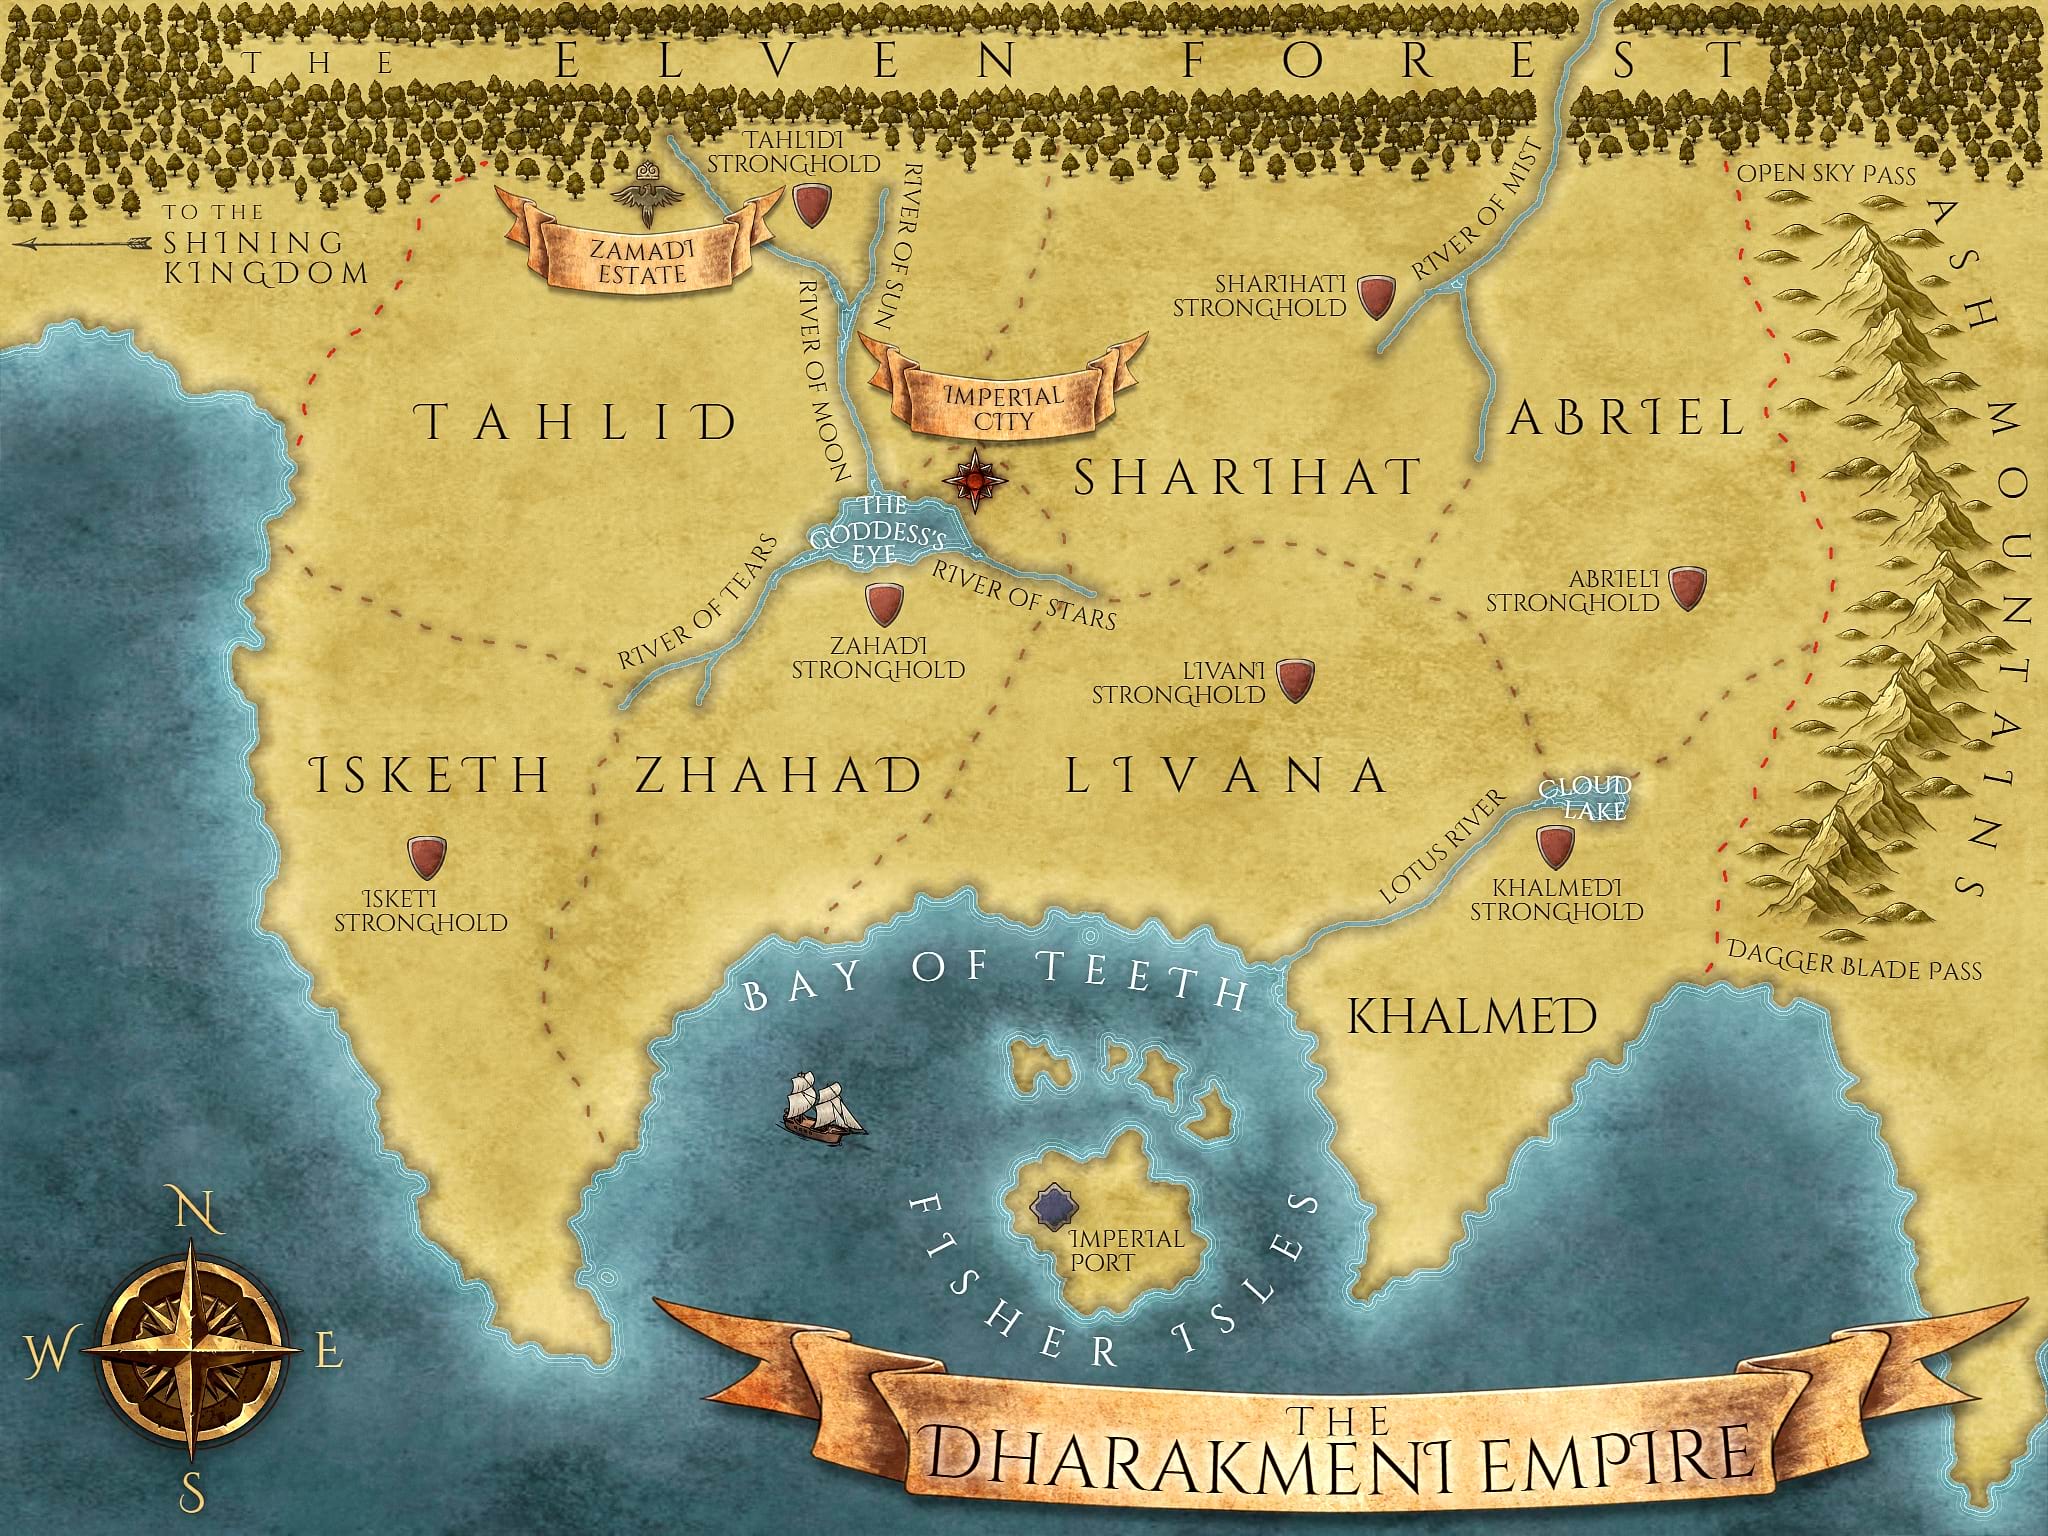 Dharakmeni Empire map from Fatal Empire fantasy intrigue series